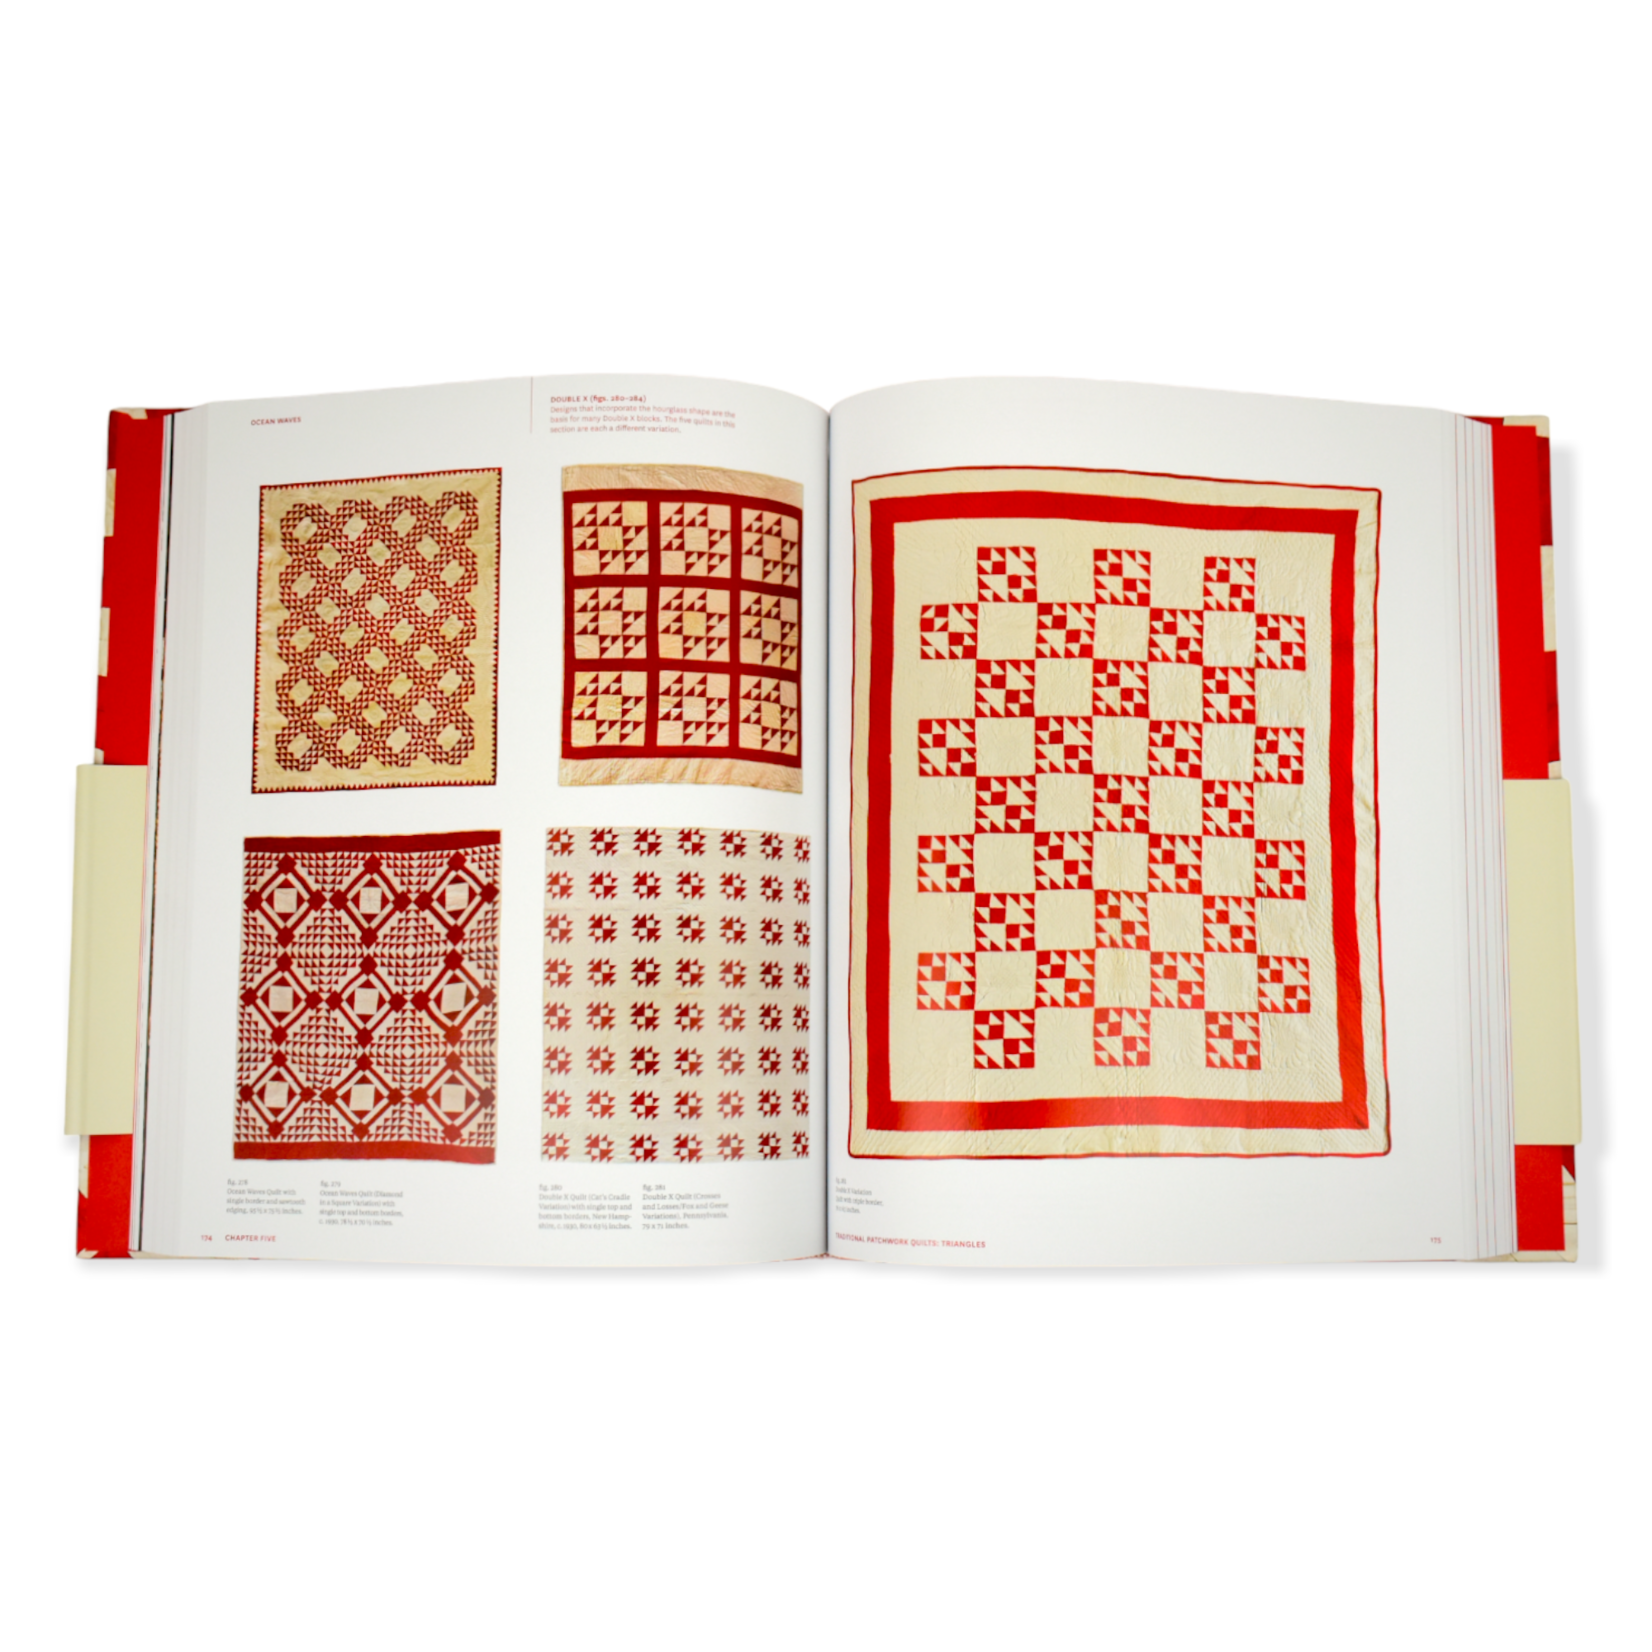 Red & White Quilts: Infinite Variety